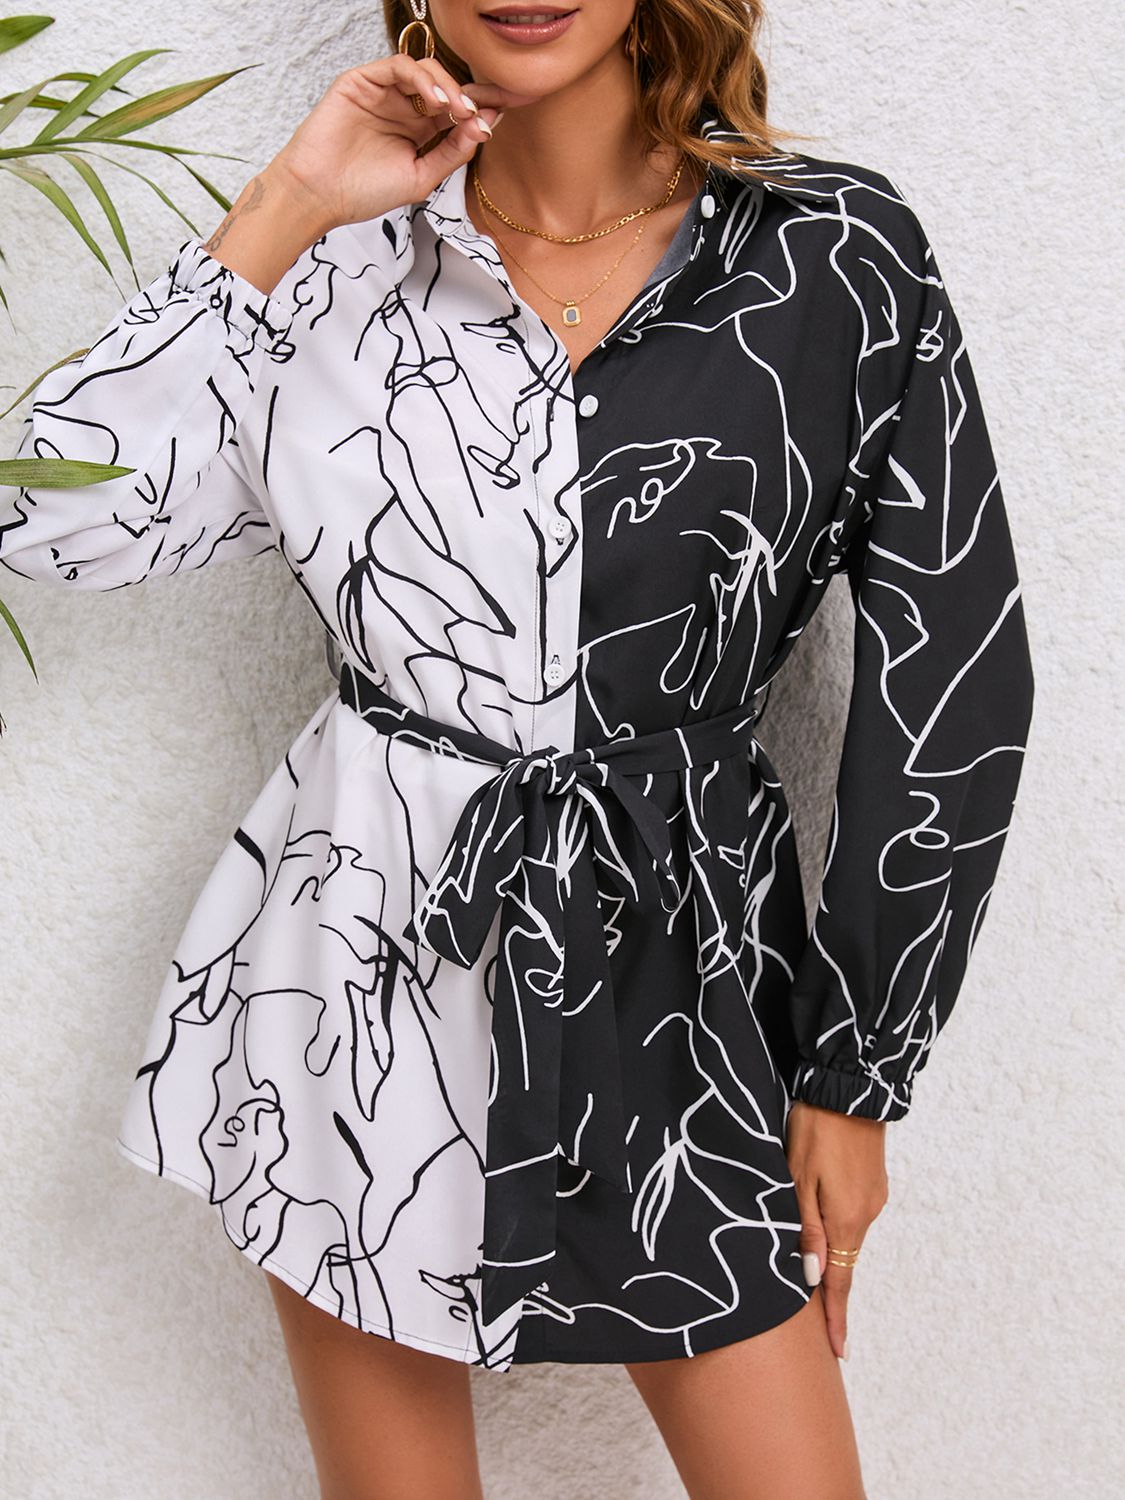 Elegant Printed Tie Waist Shirt Dress for Mexico Wedding Guests - Perfect for Beach and Garden Ceremonies